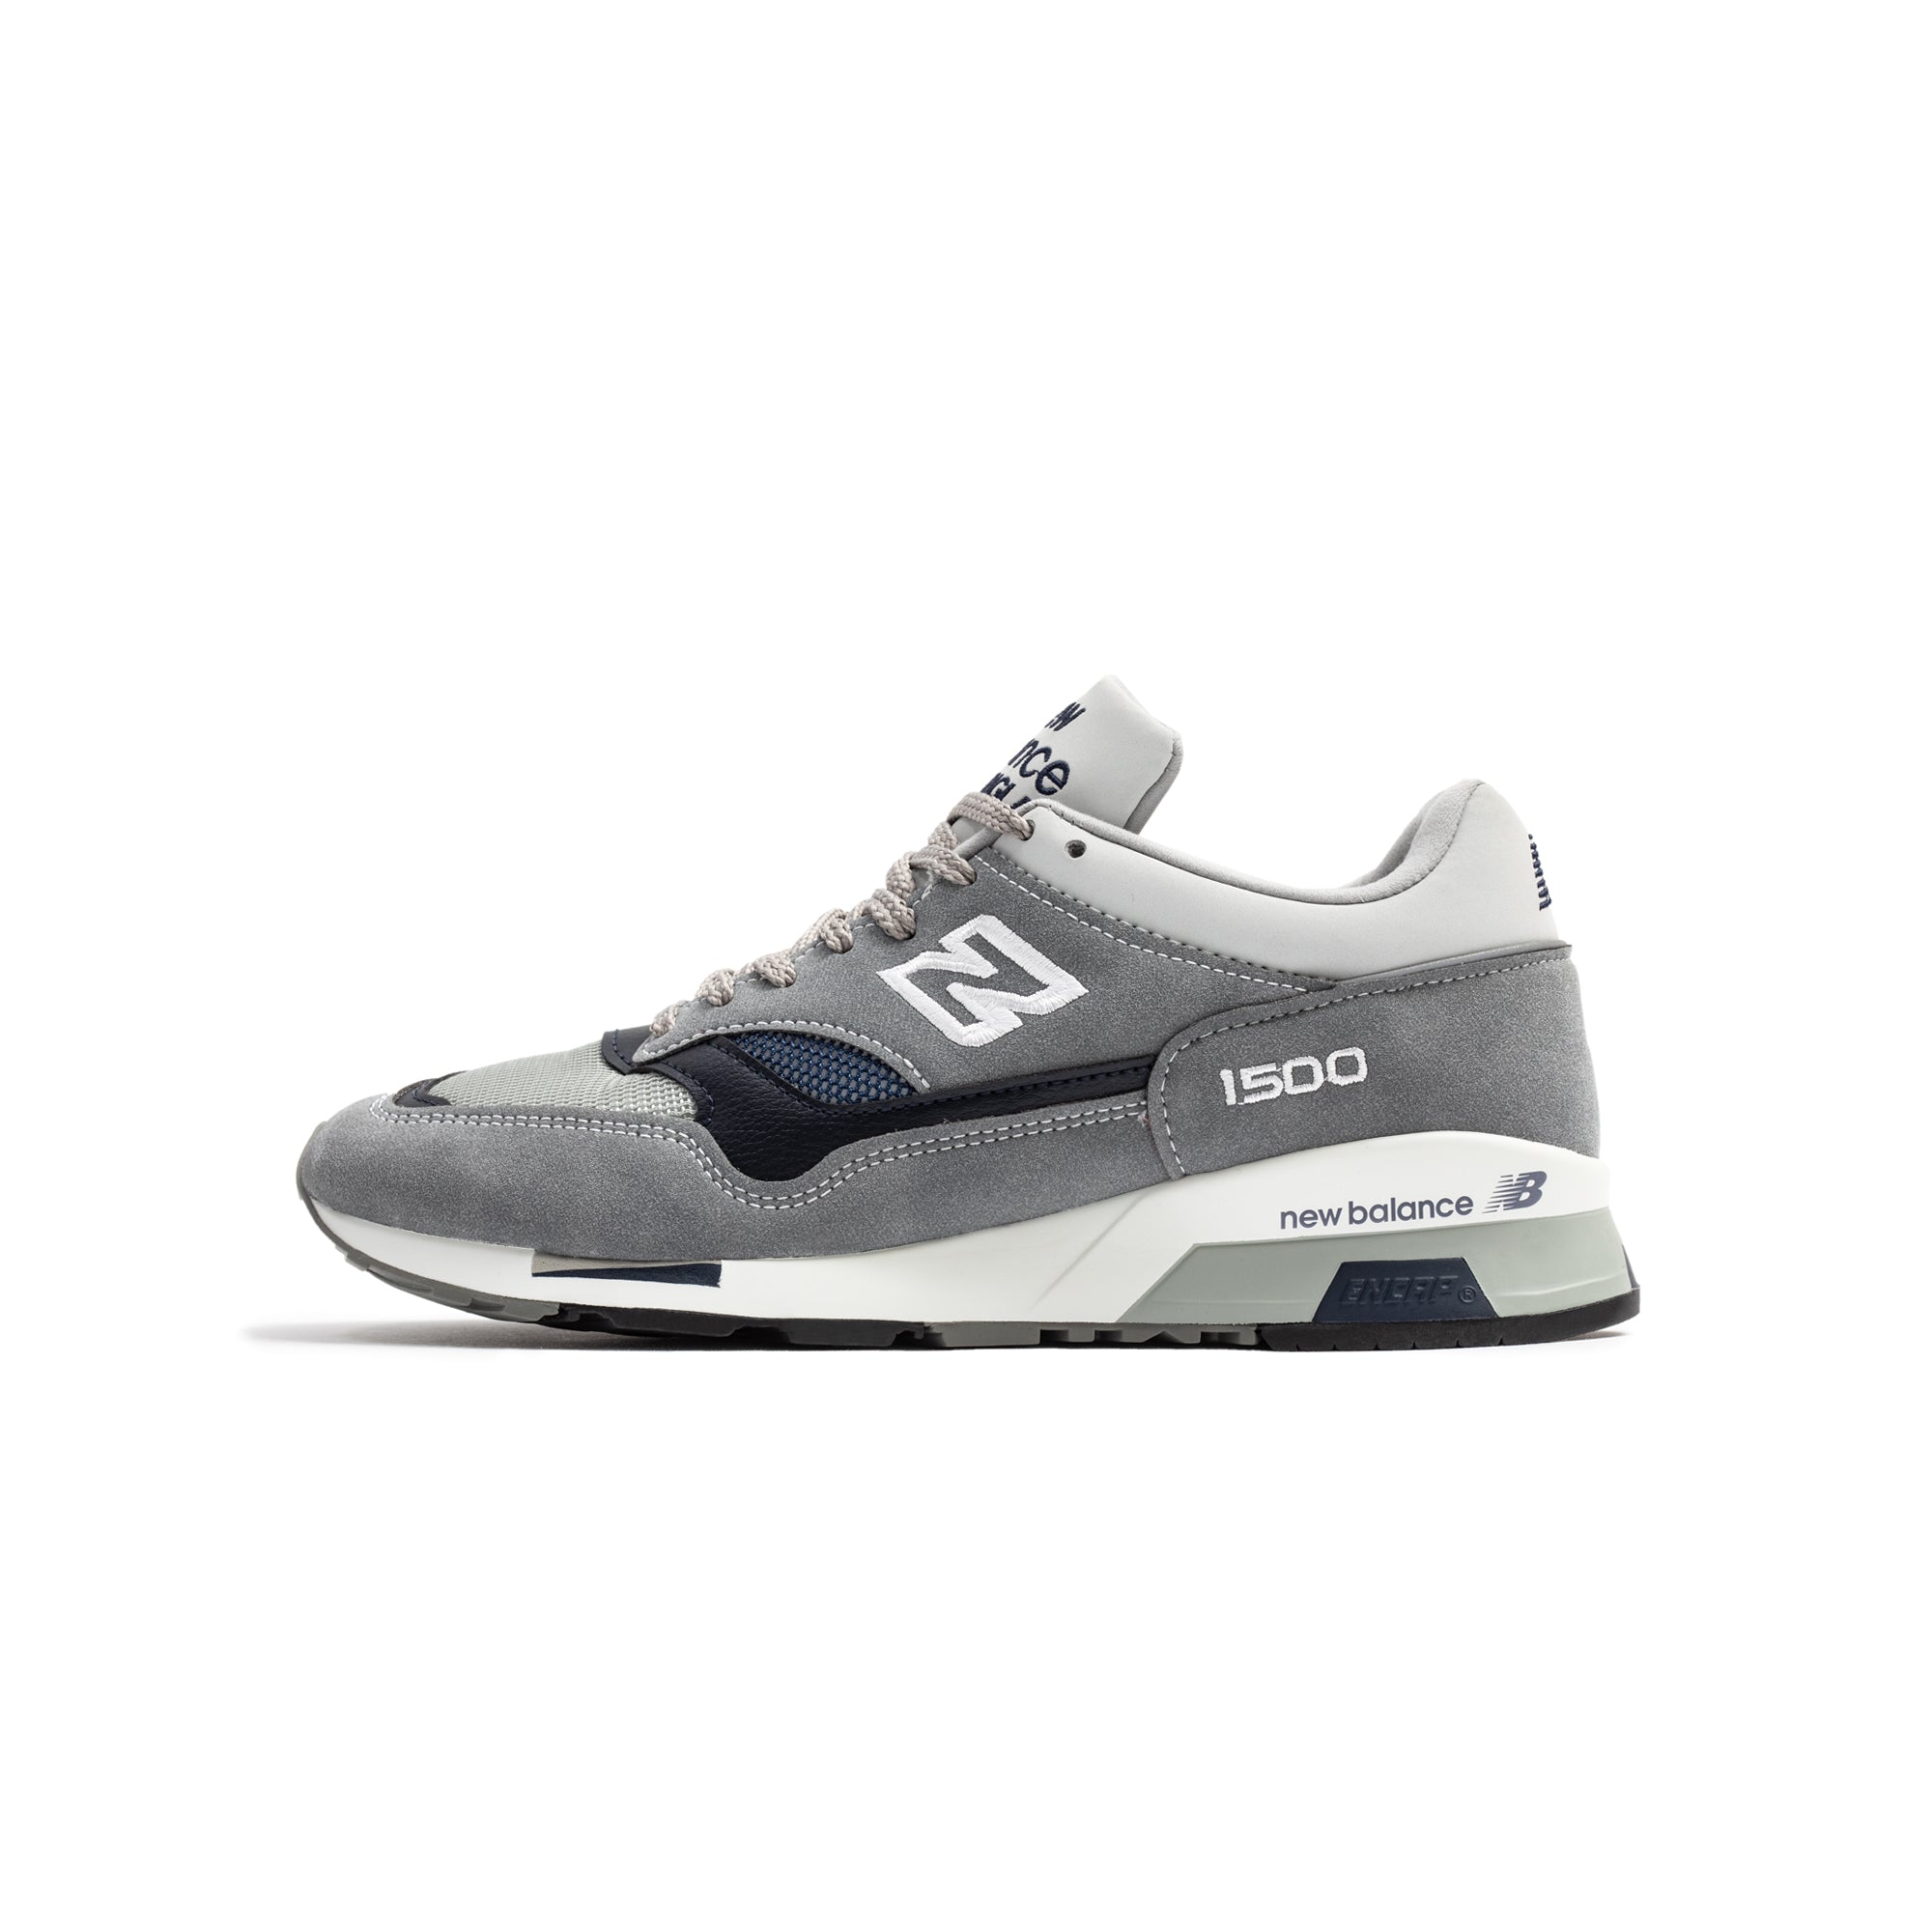 New Balance Mens Made in UK 1500 Shoes card image